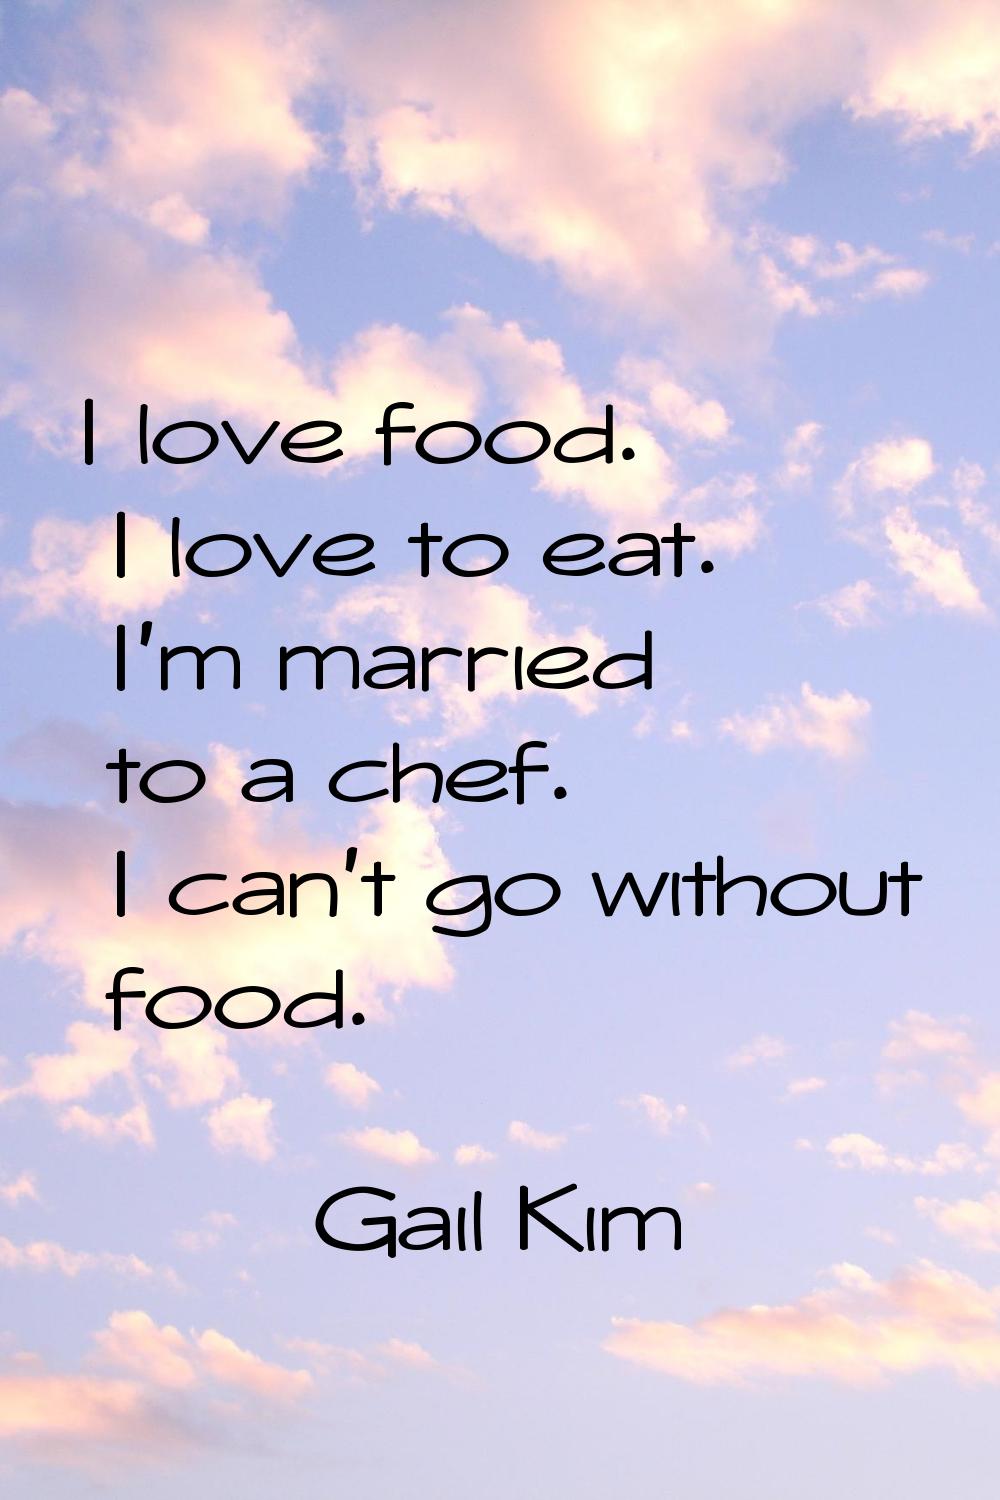 I love food. I love to eat. I'm married to a chef. I can't go without food.